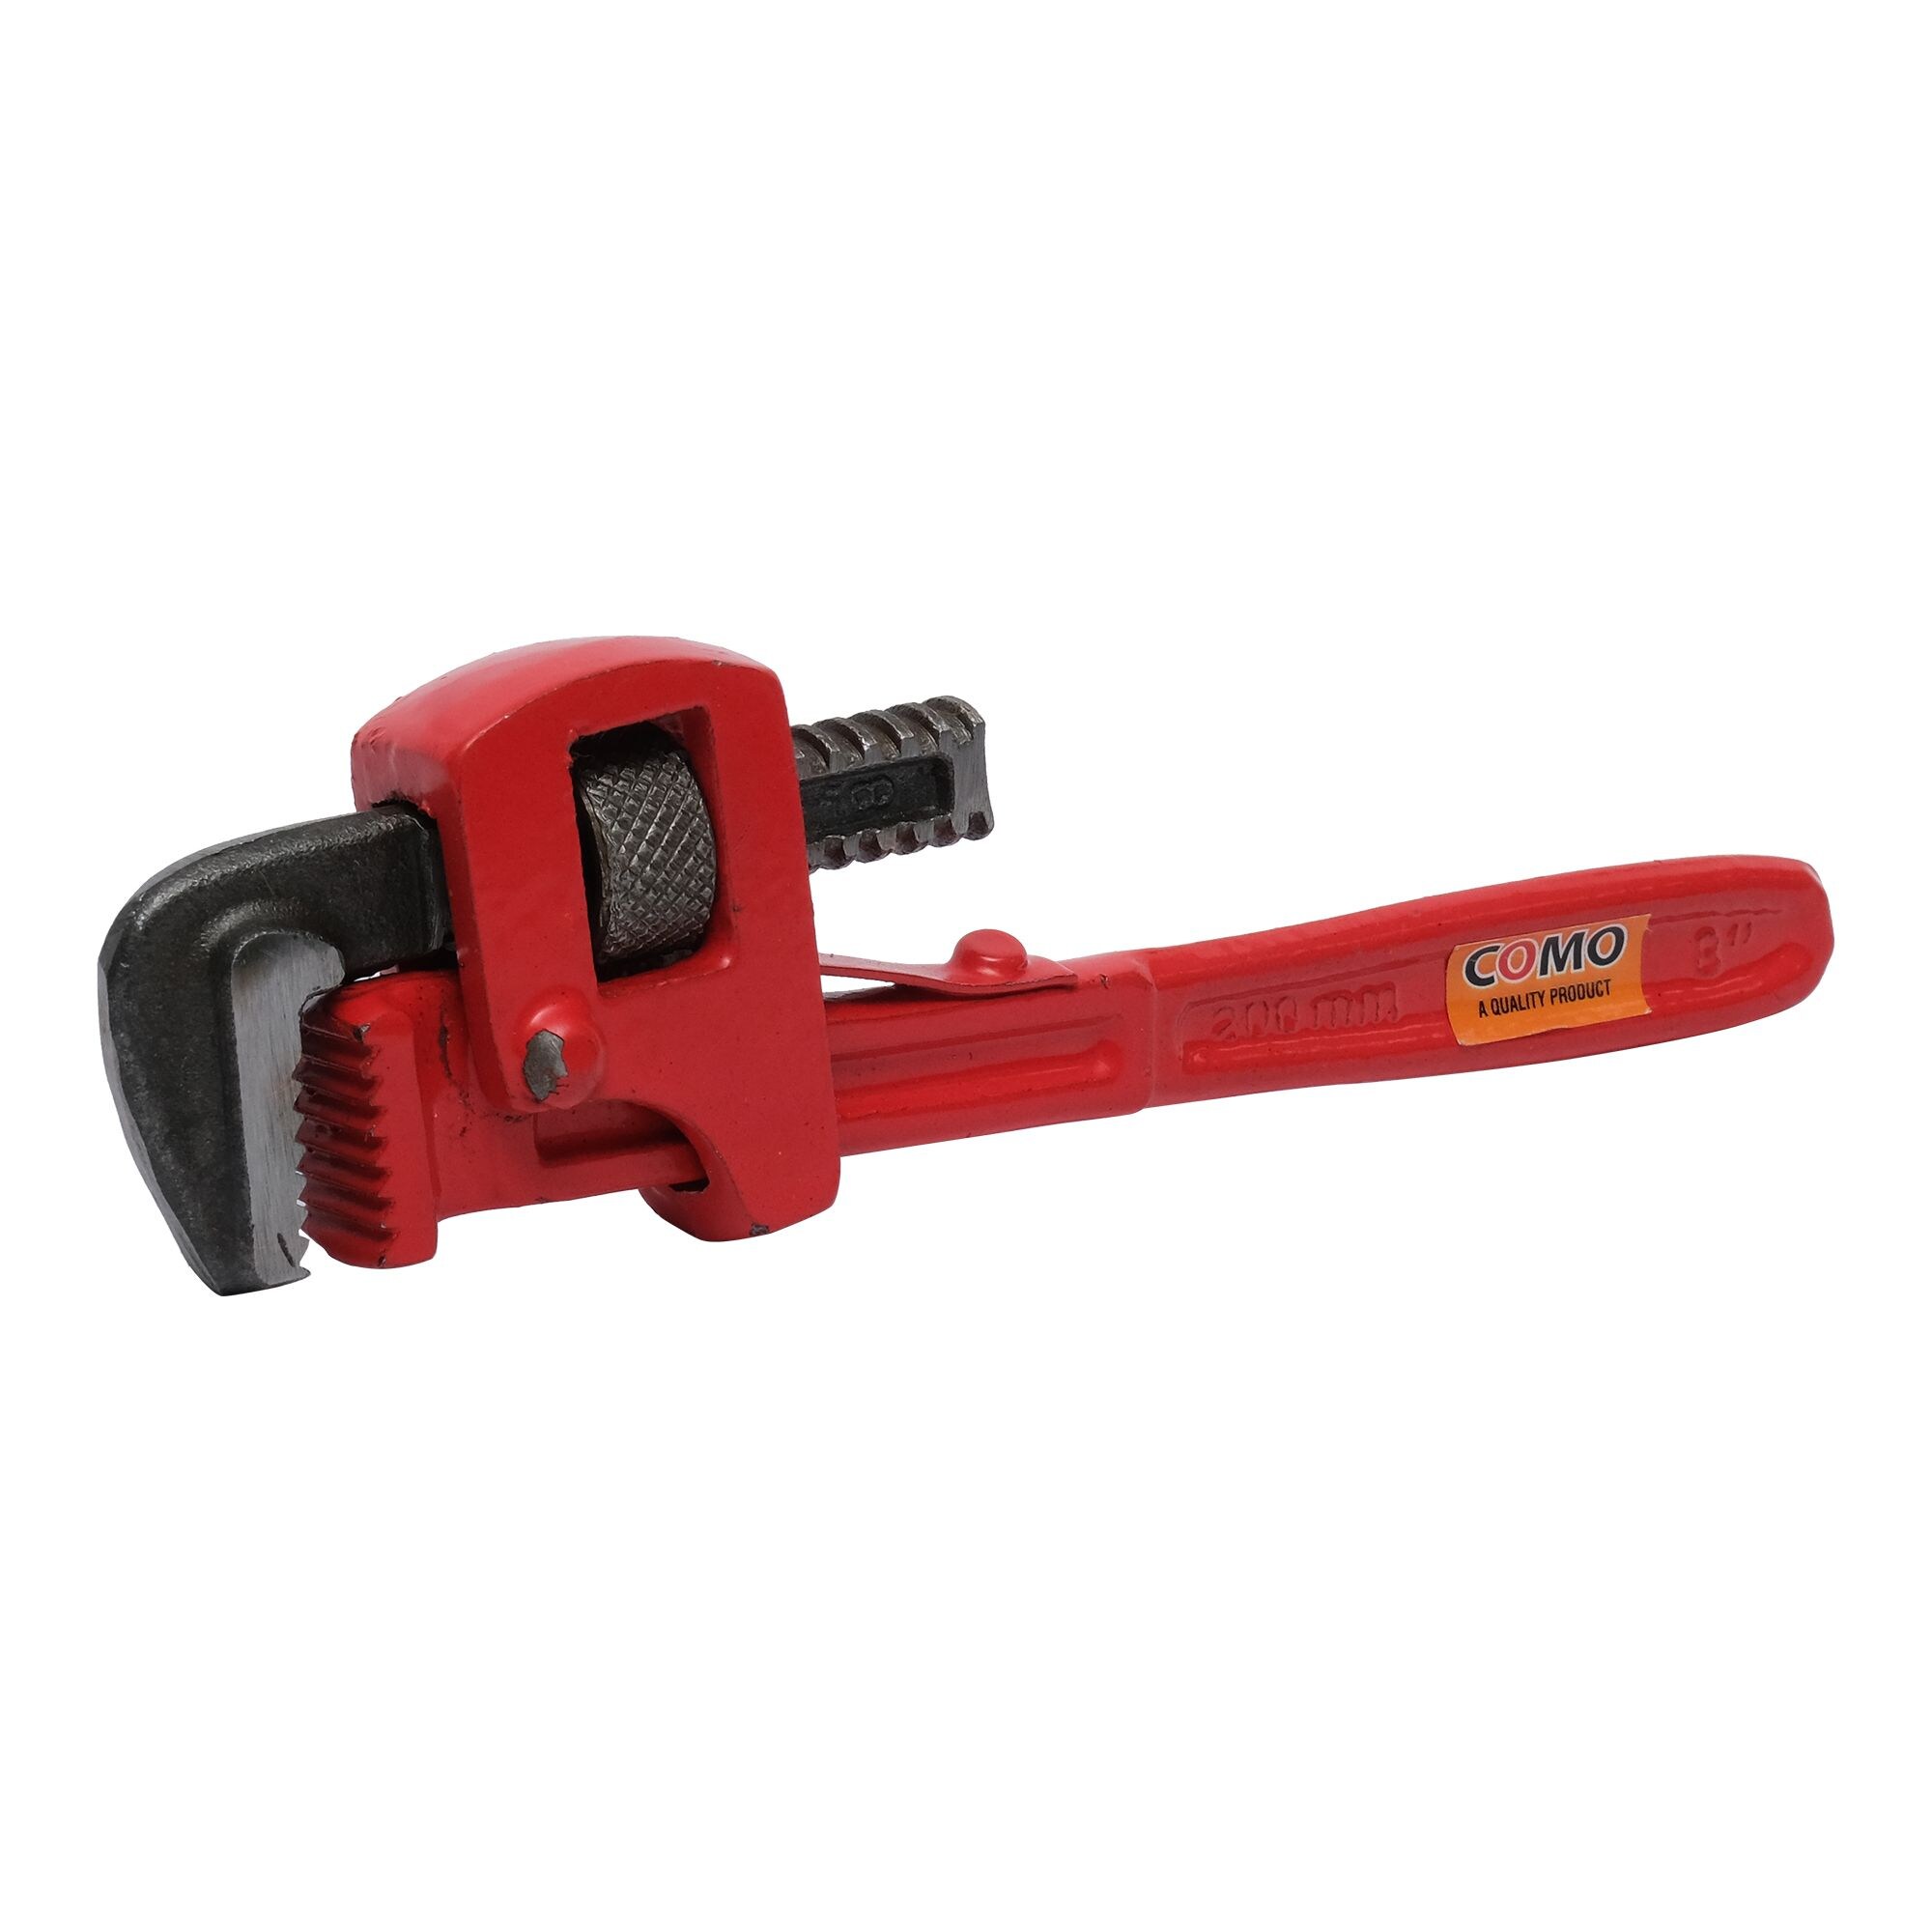 Como Heavy Duty Pipe Wrench, 8 Inch - Red